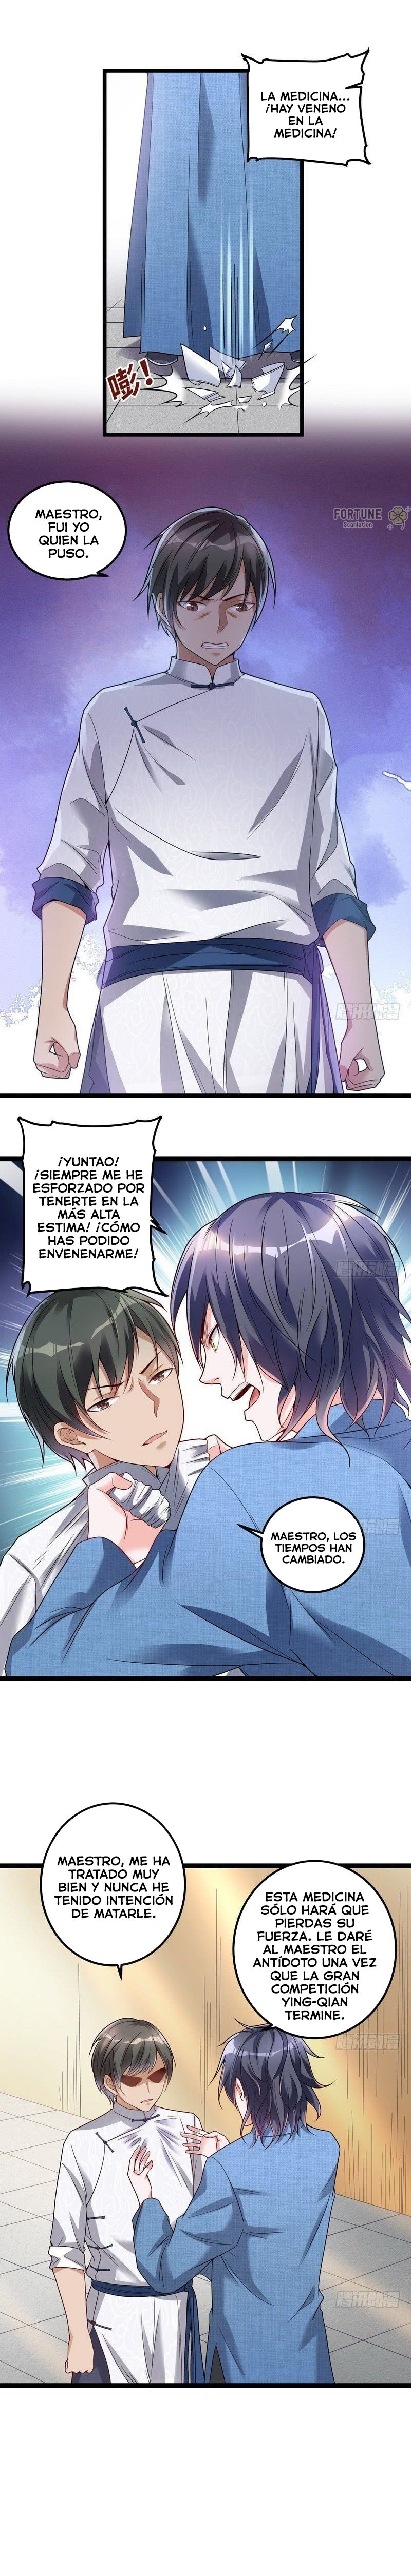 Manga Soy un dios maligno Chapter 17 image number 12